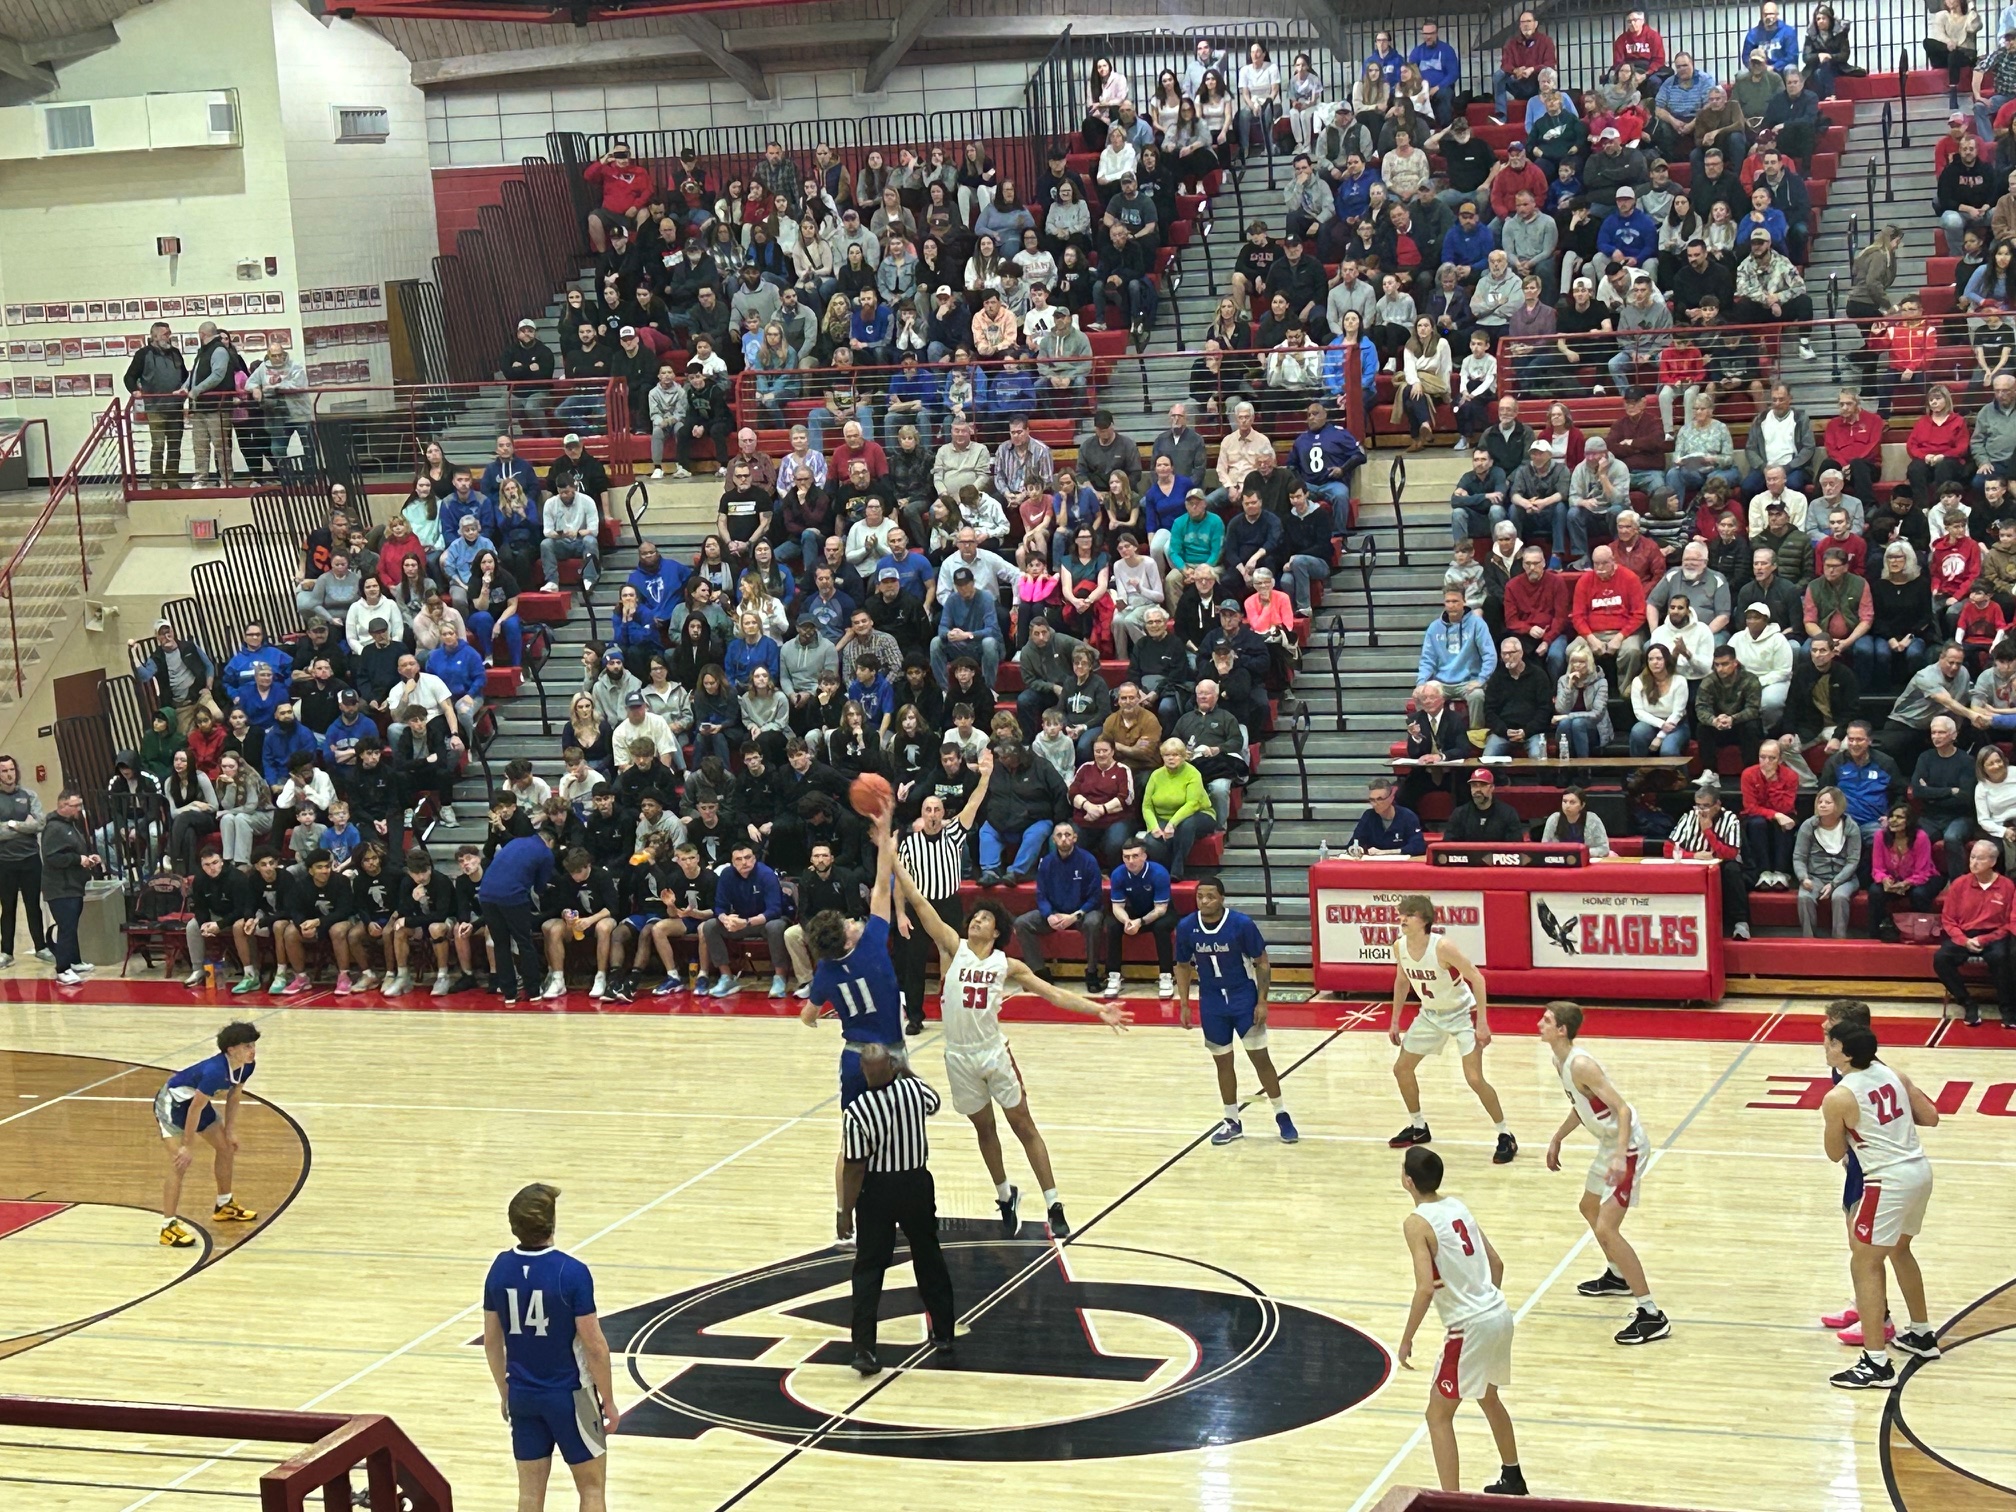 Despite Slugglish Start, Cumberland Valley’s ‘Dudes’ Come Alive In Second Half Against Cedar Crest As Eagles Advance To District 3-6A Final Four, Await Championship Rematch Against Reading High At Home